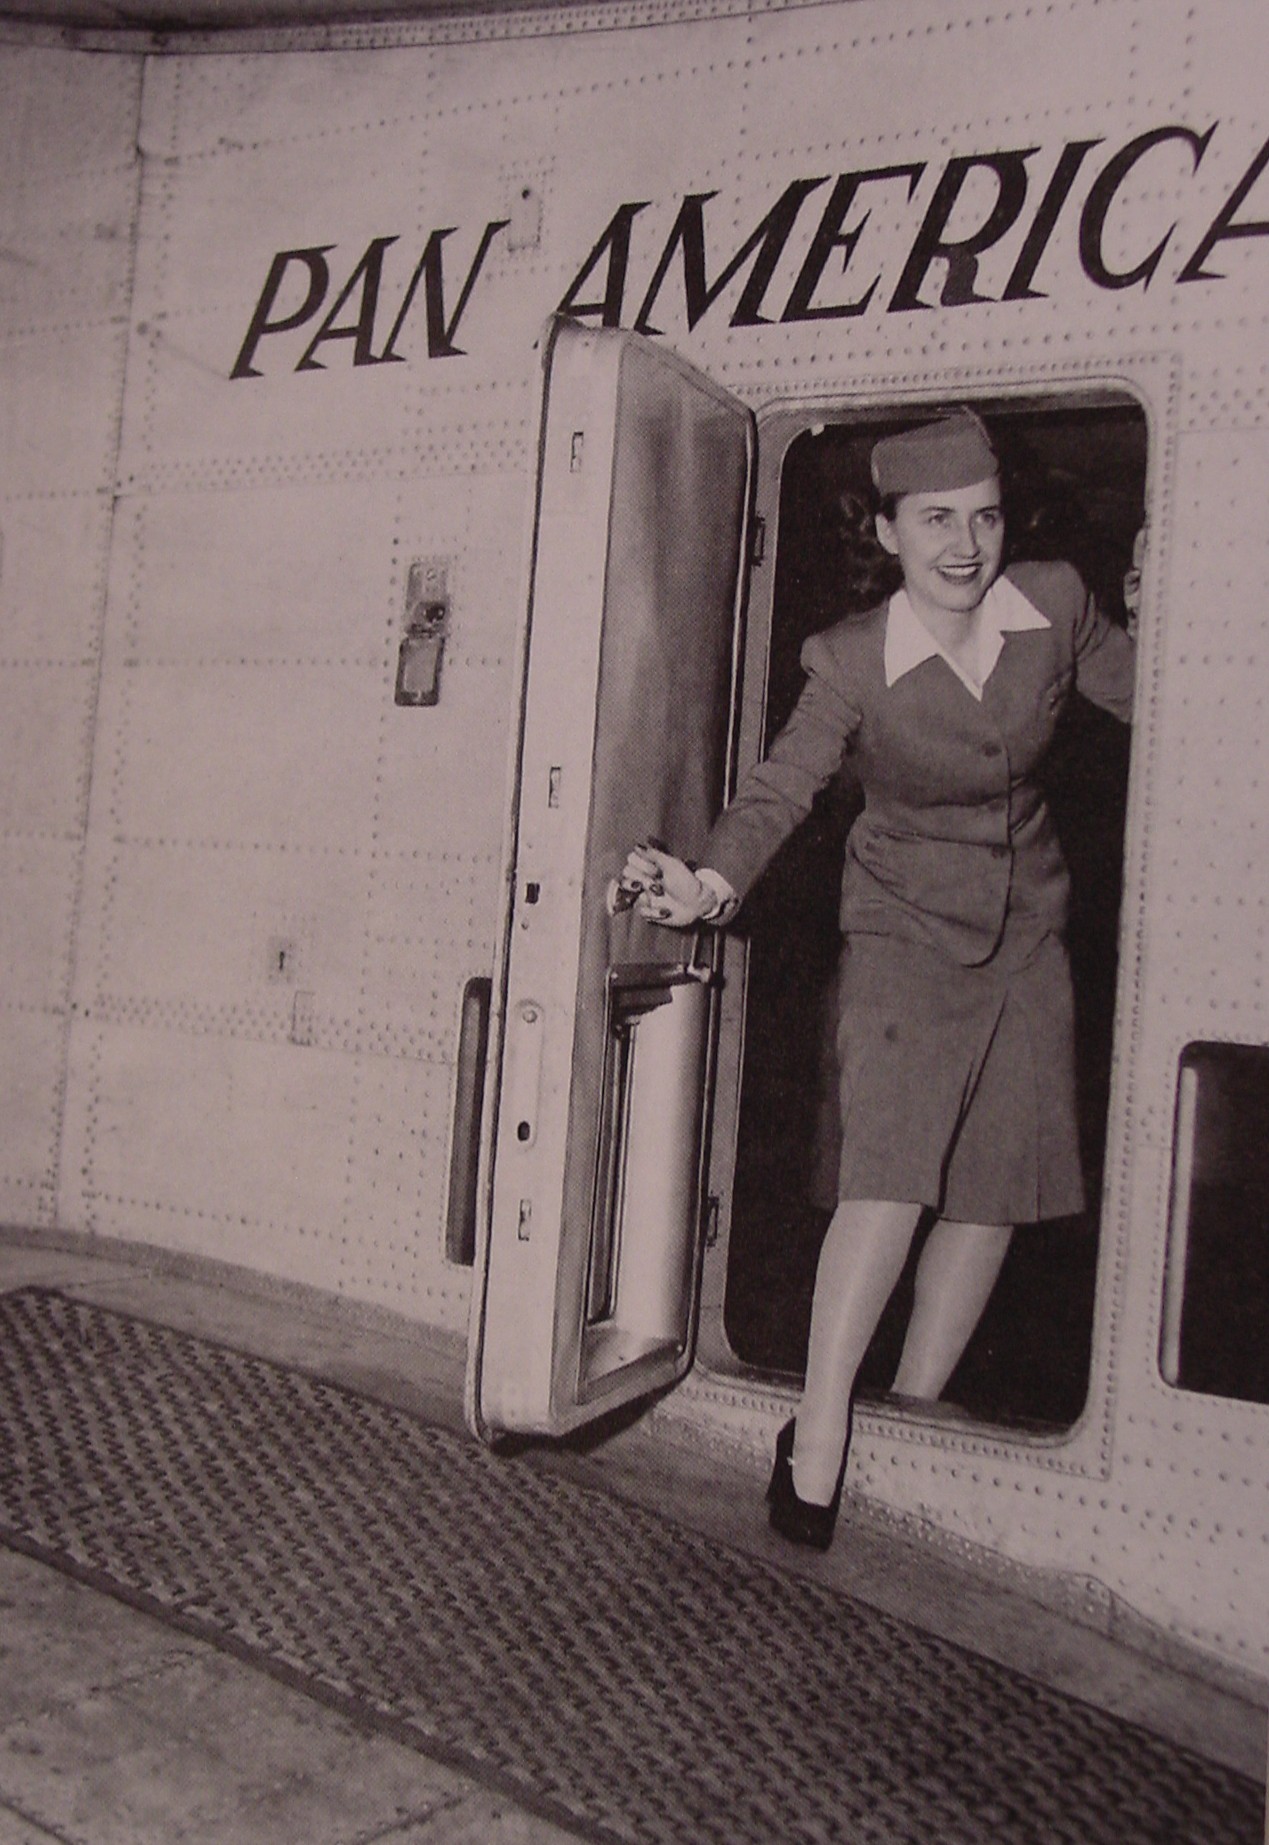 1940s Pan Am's first Stewardess, Madeline Cuniff in the doorway of a Boeing 314 flying boat